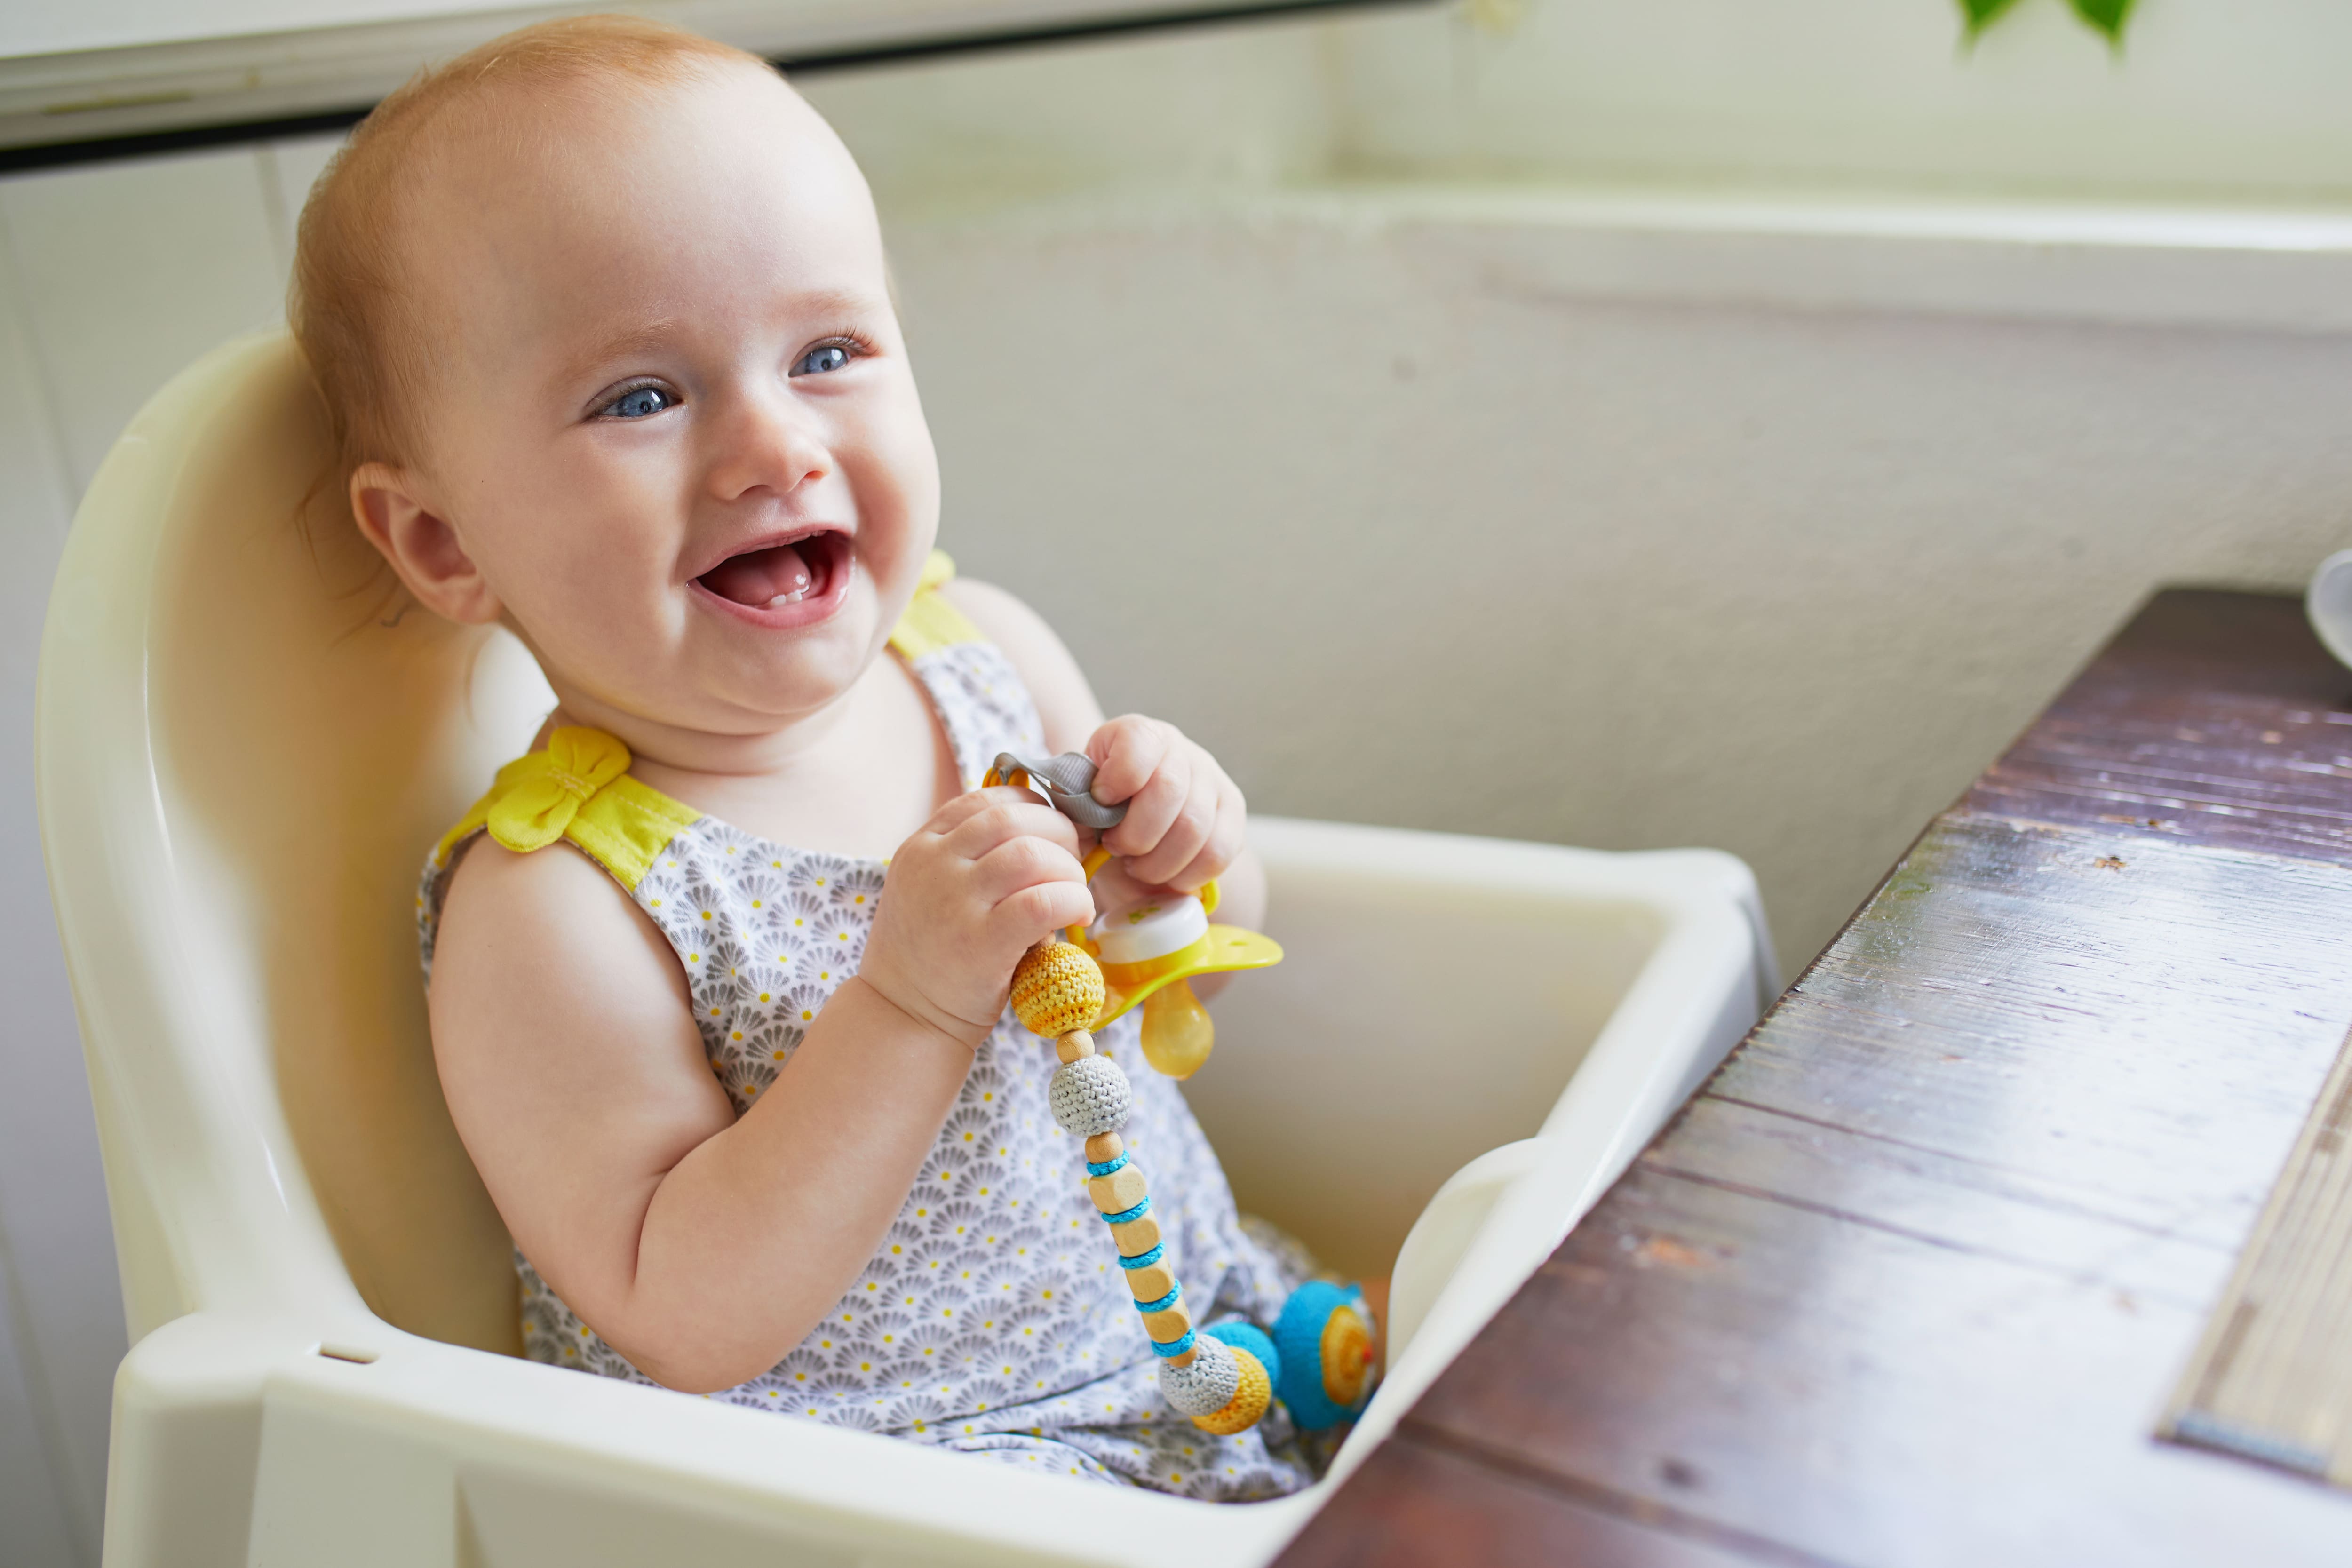 A little baby girl sitting in high chair and holding a pacifier while smiling